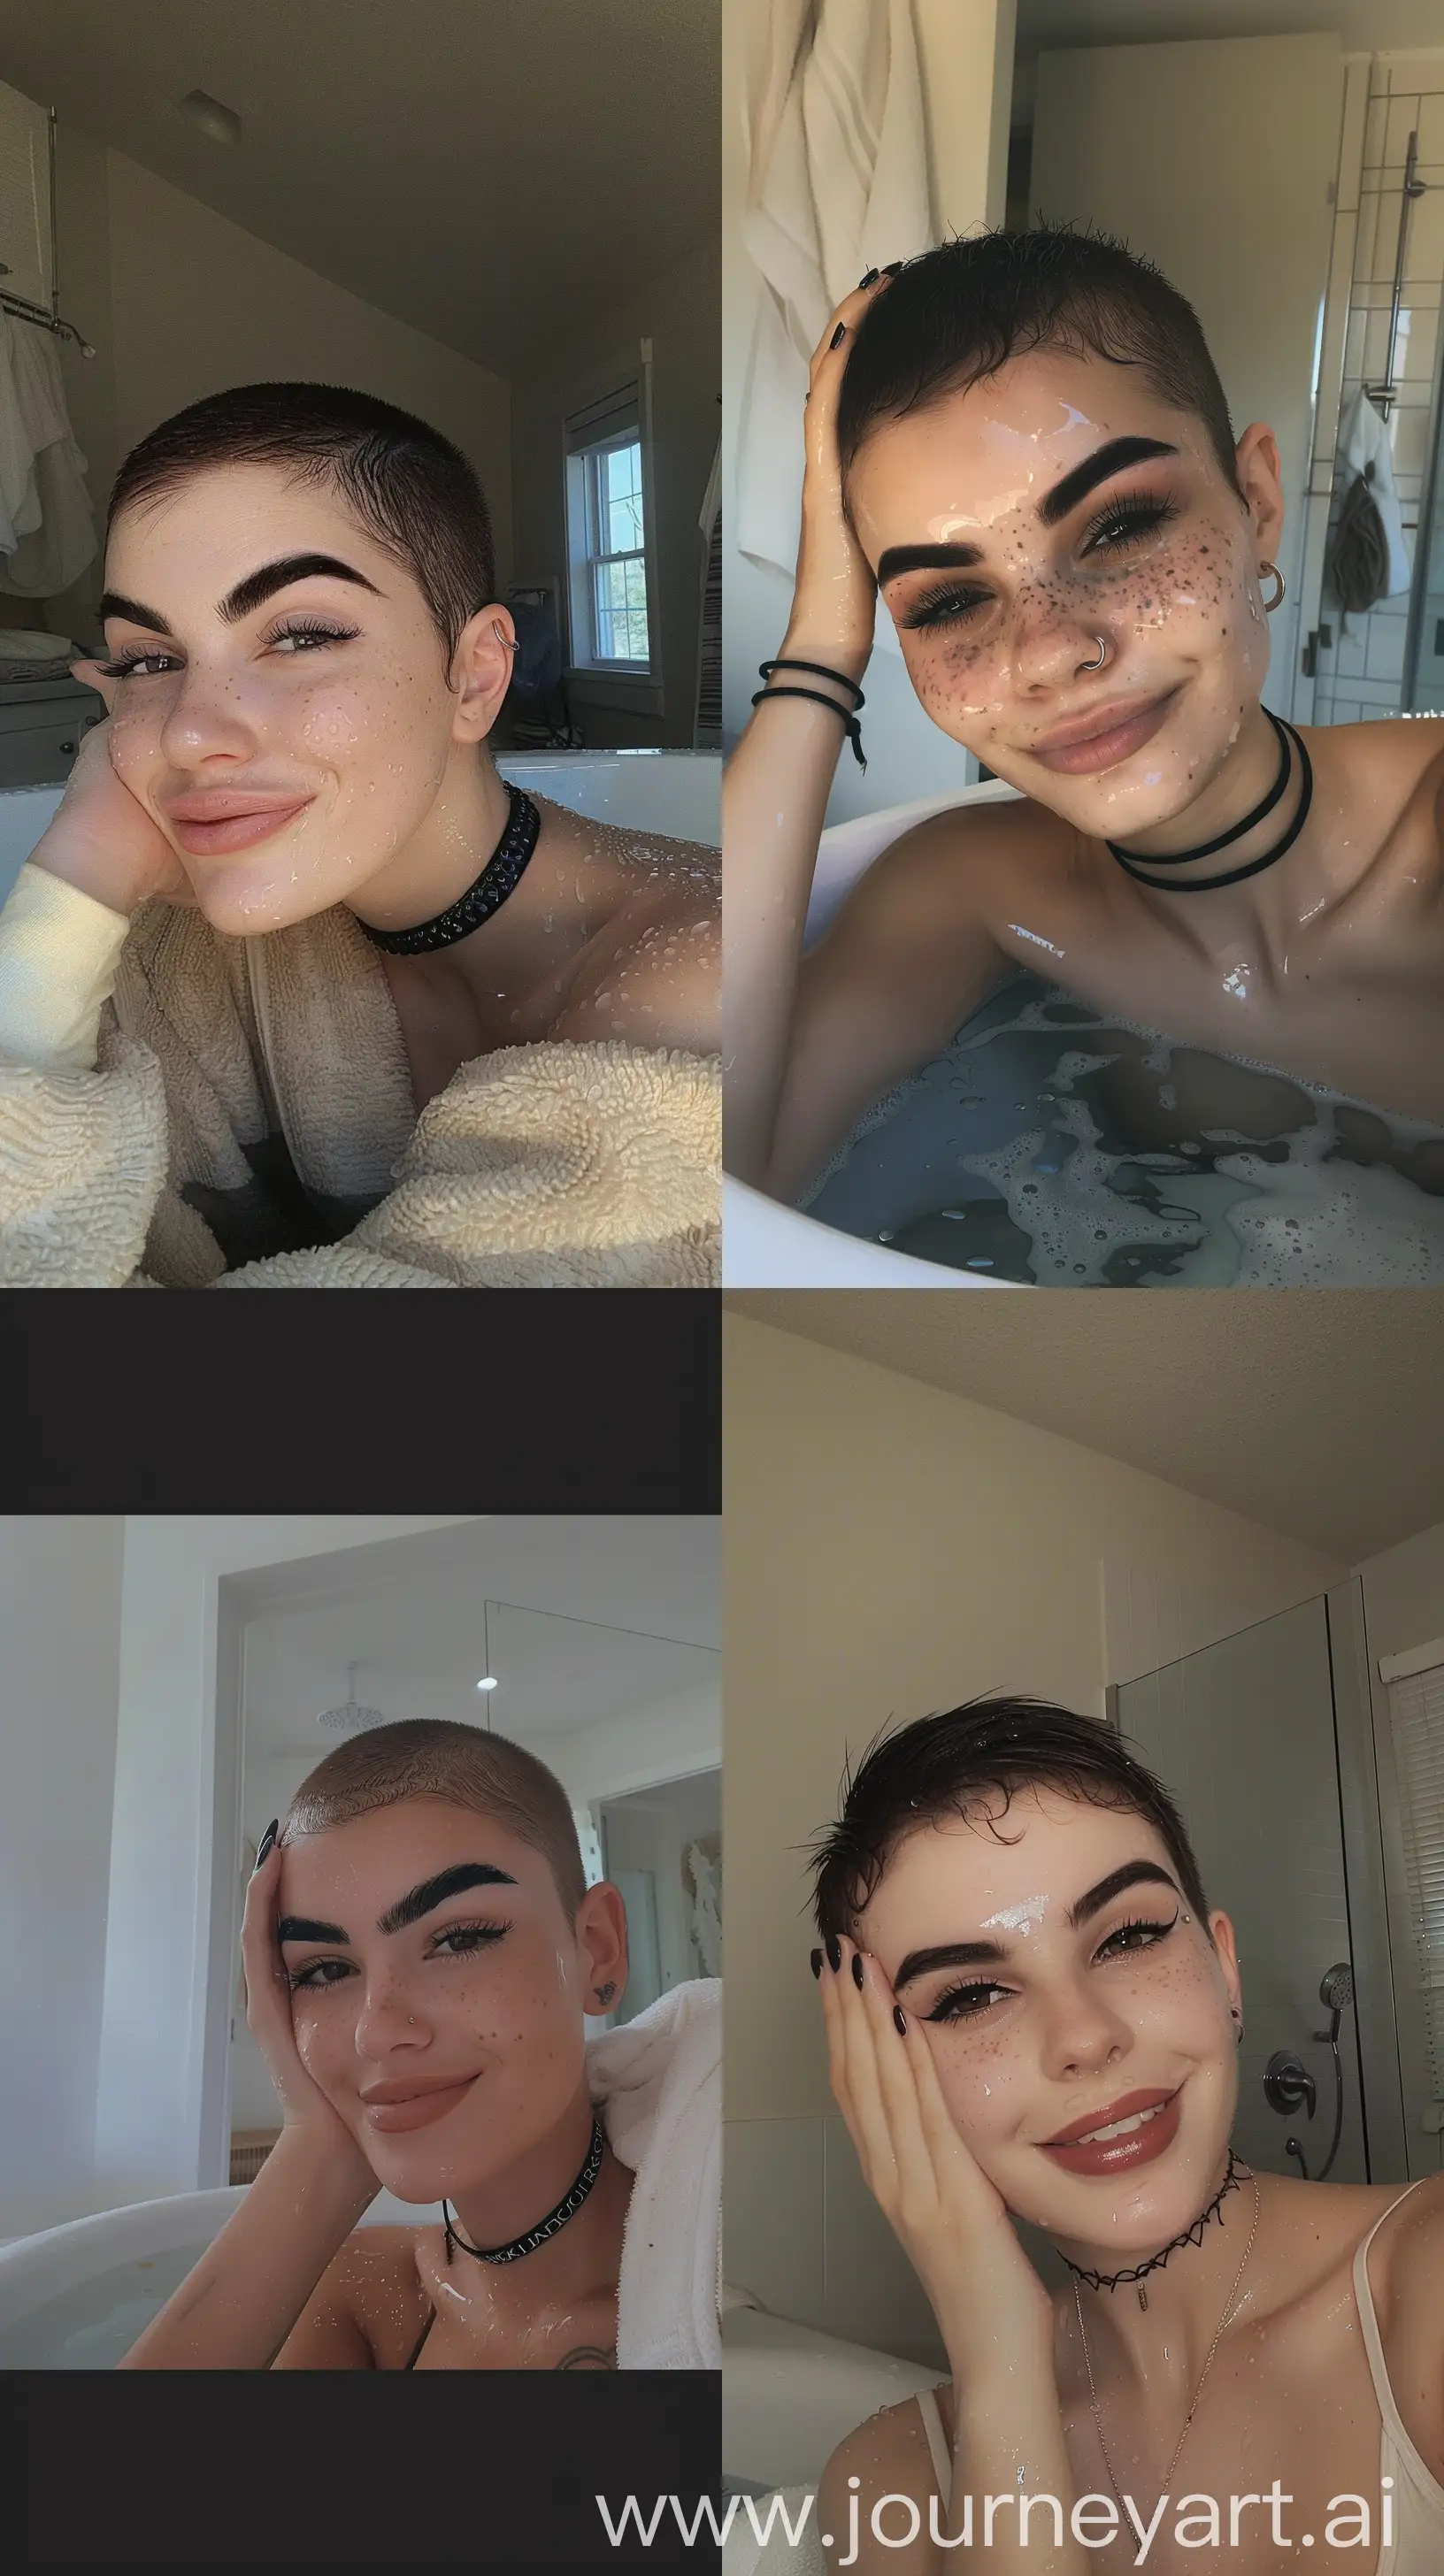 EGirl-Selfie-Smiling-with-Intensity-by-the-Tub